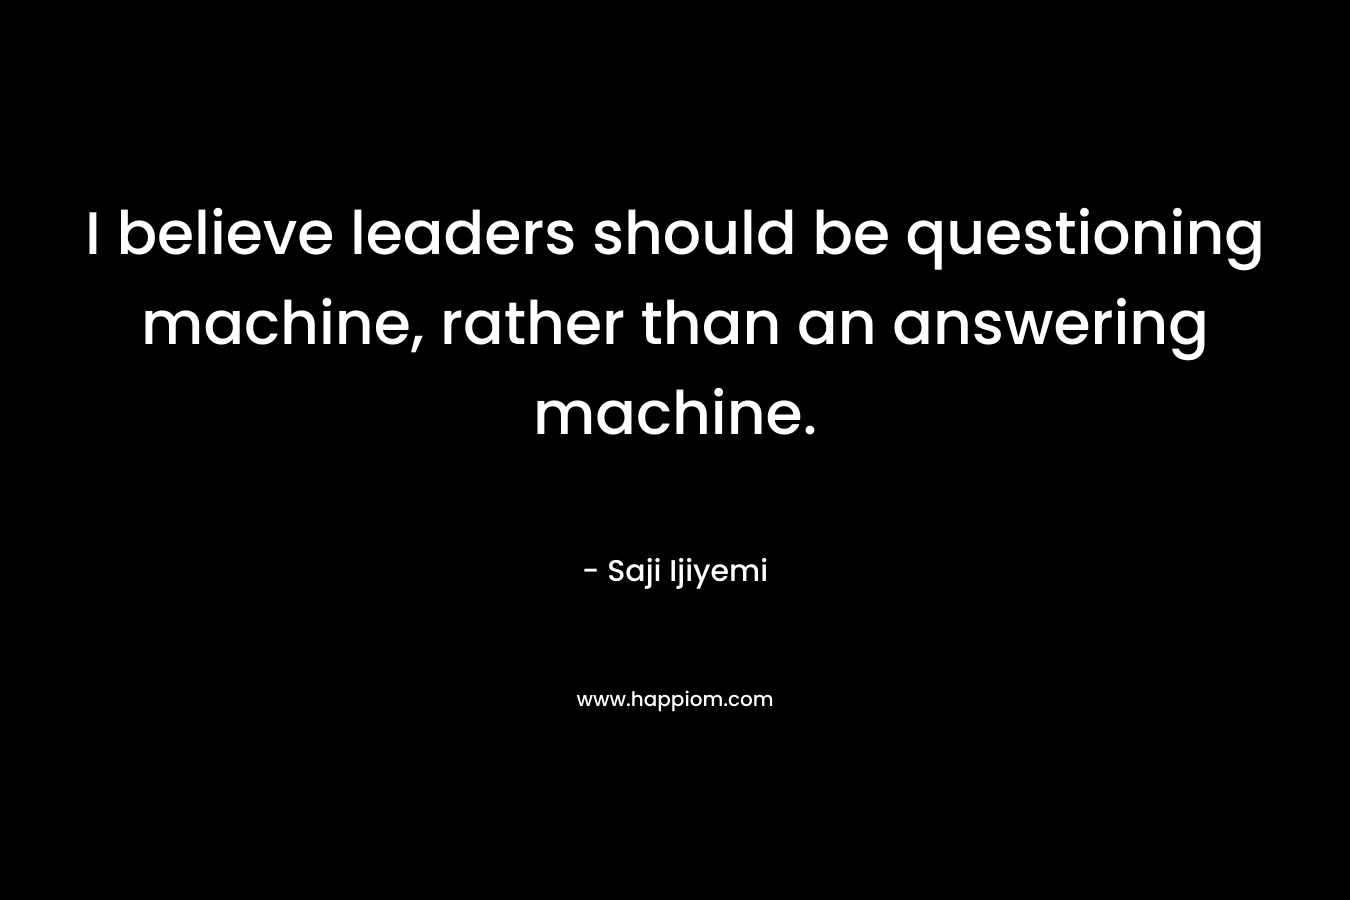 I believe leaders should be questioning machine, rather than an answering machine.